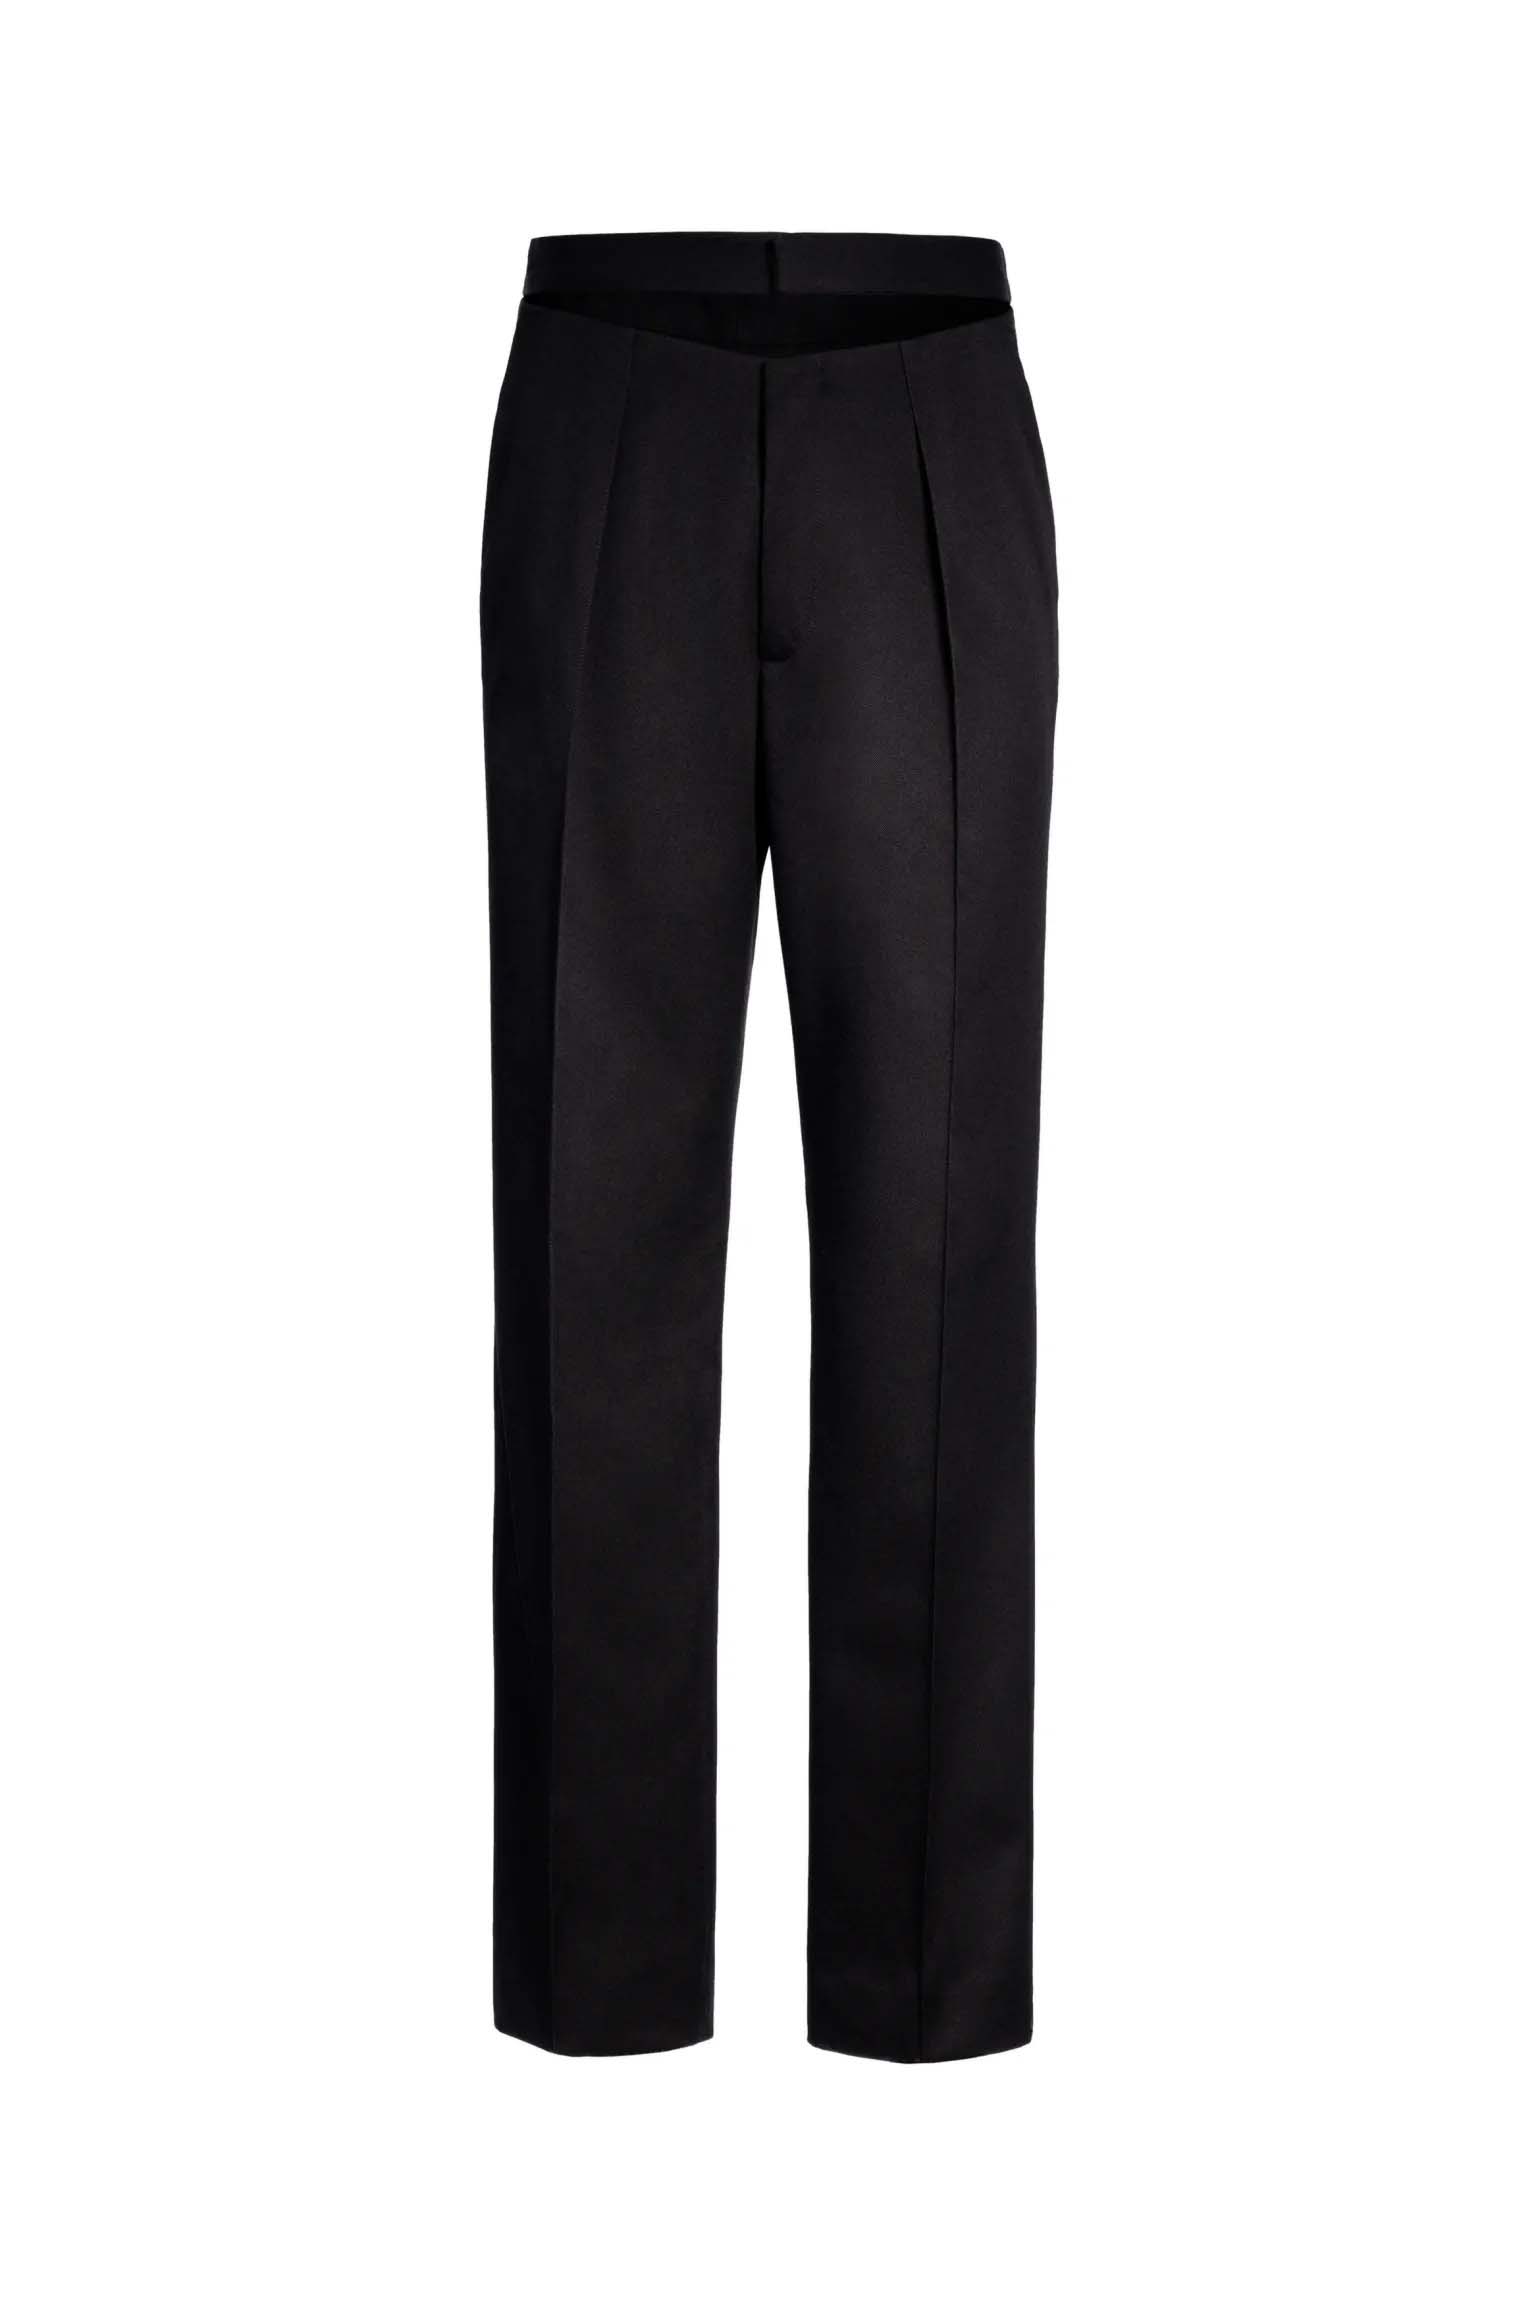 Articles of Style | Signature Boiled Wool Trouser